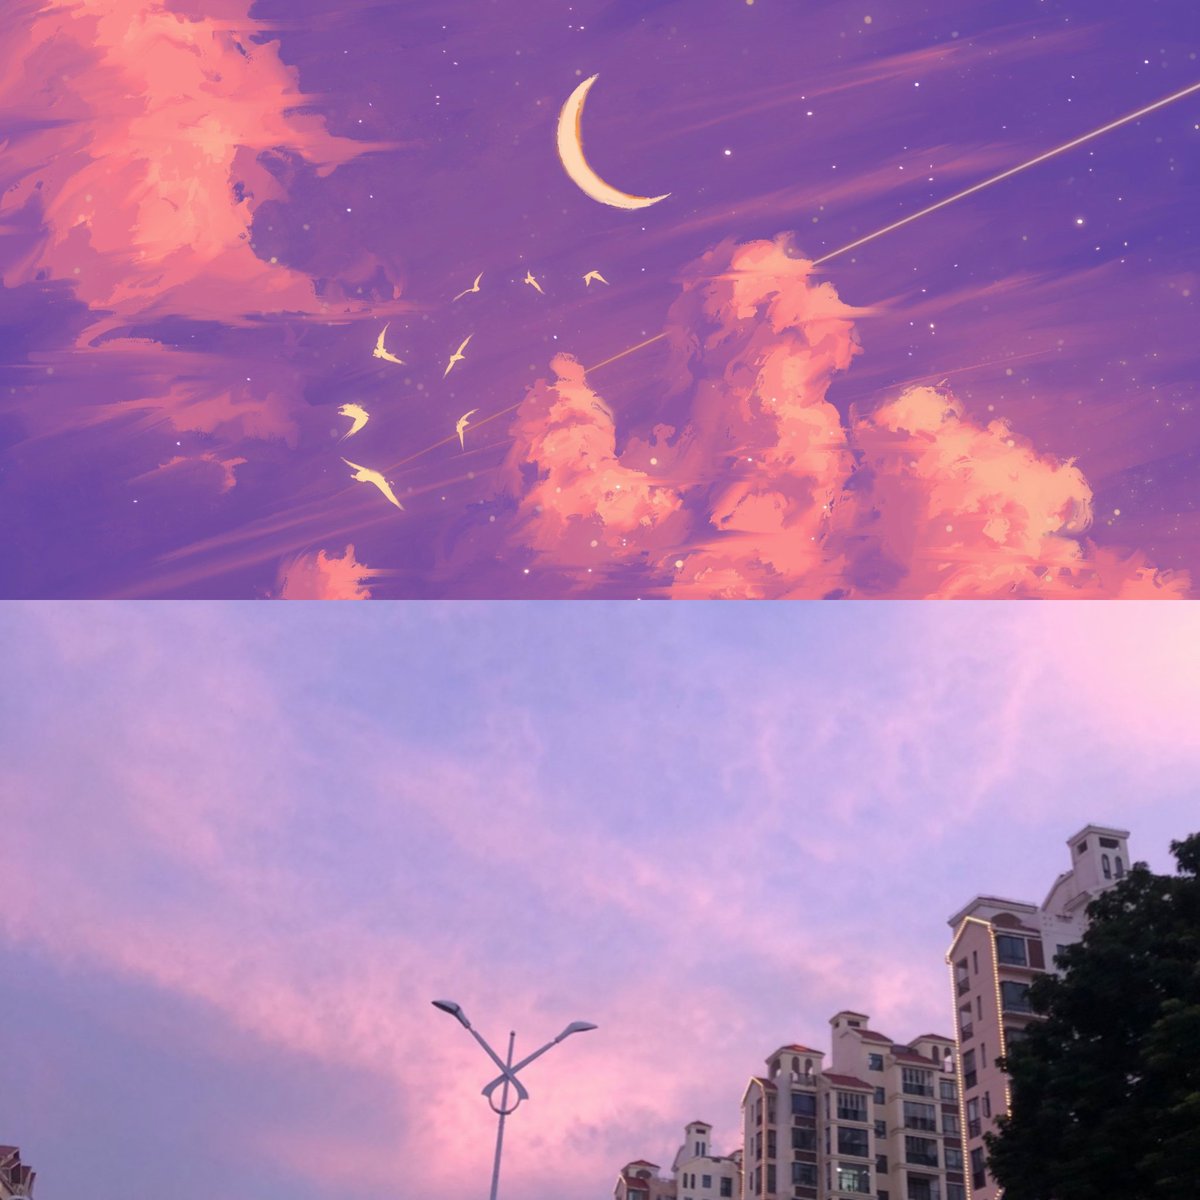 Looking up at the pink and purple sky of #Danzhou feels like stepping into a scene from a Wes Anderson movie. It's so stunningly #picturesque that it's almost medicinal, offering a healing balm for the soul. Come visit and experience the magic for yourself! 💓💓💕
#WesAnderson